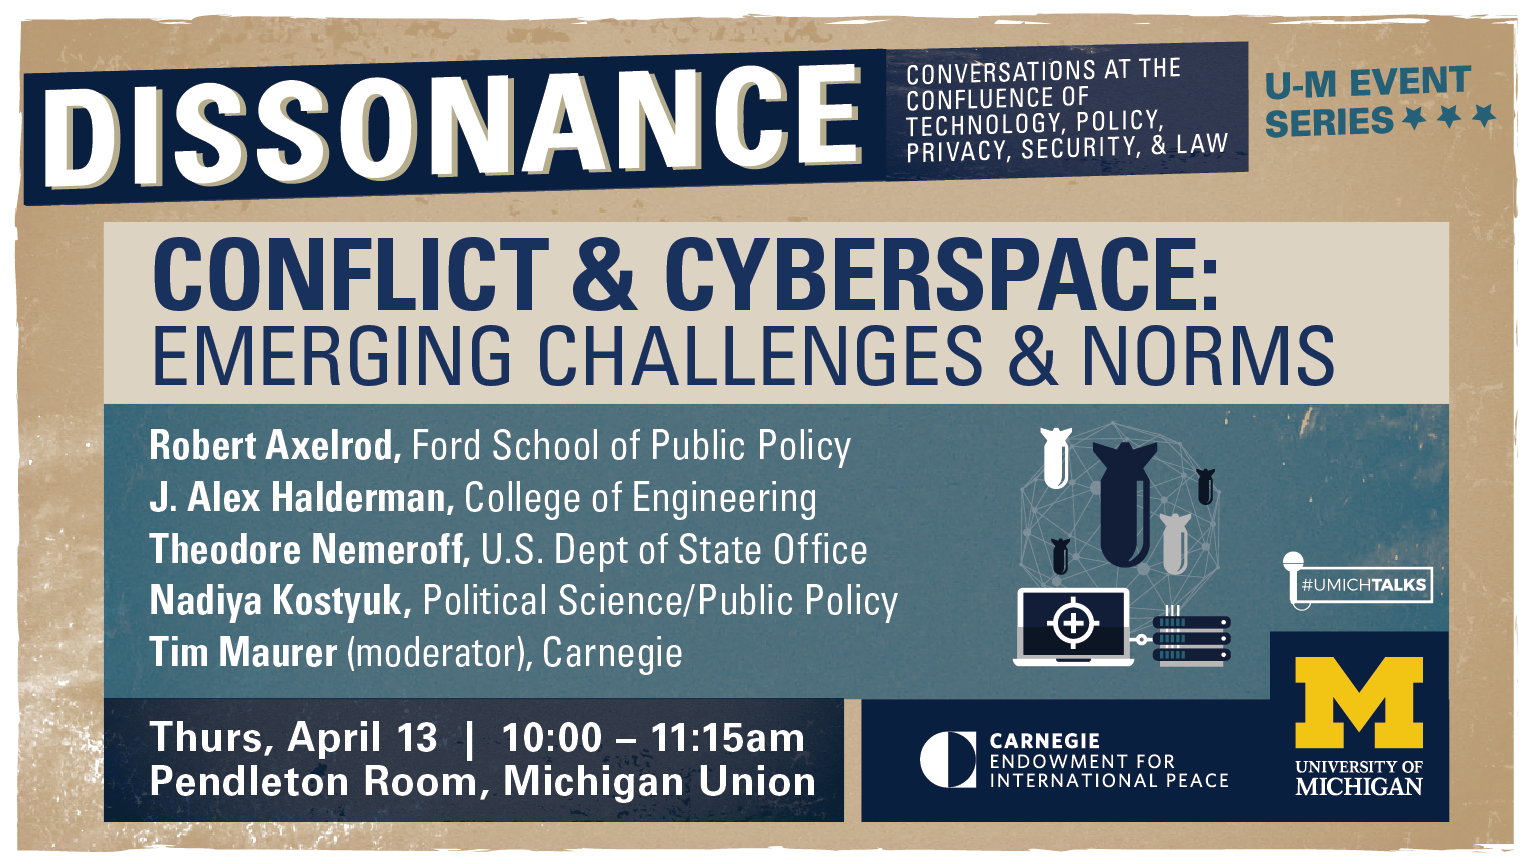 Graphic with information about Dissonance: Conflict & Cyberspace event